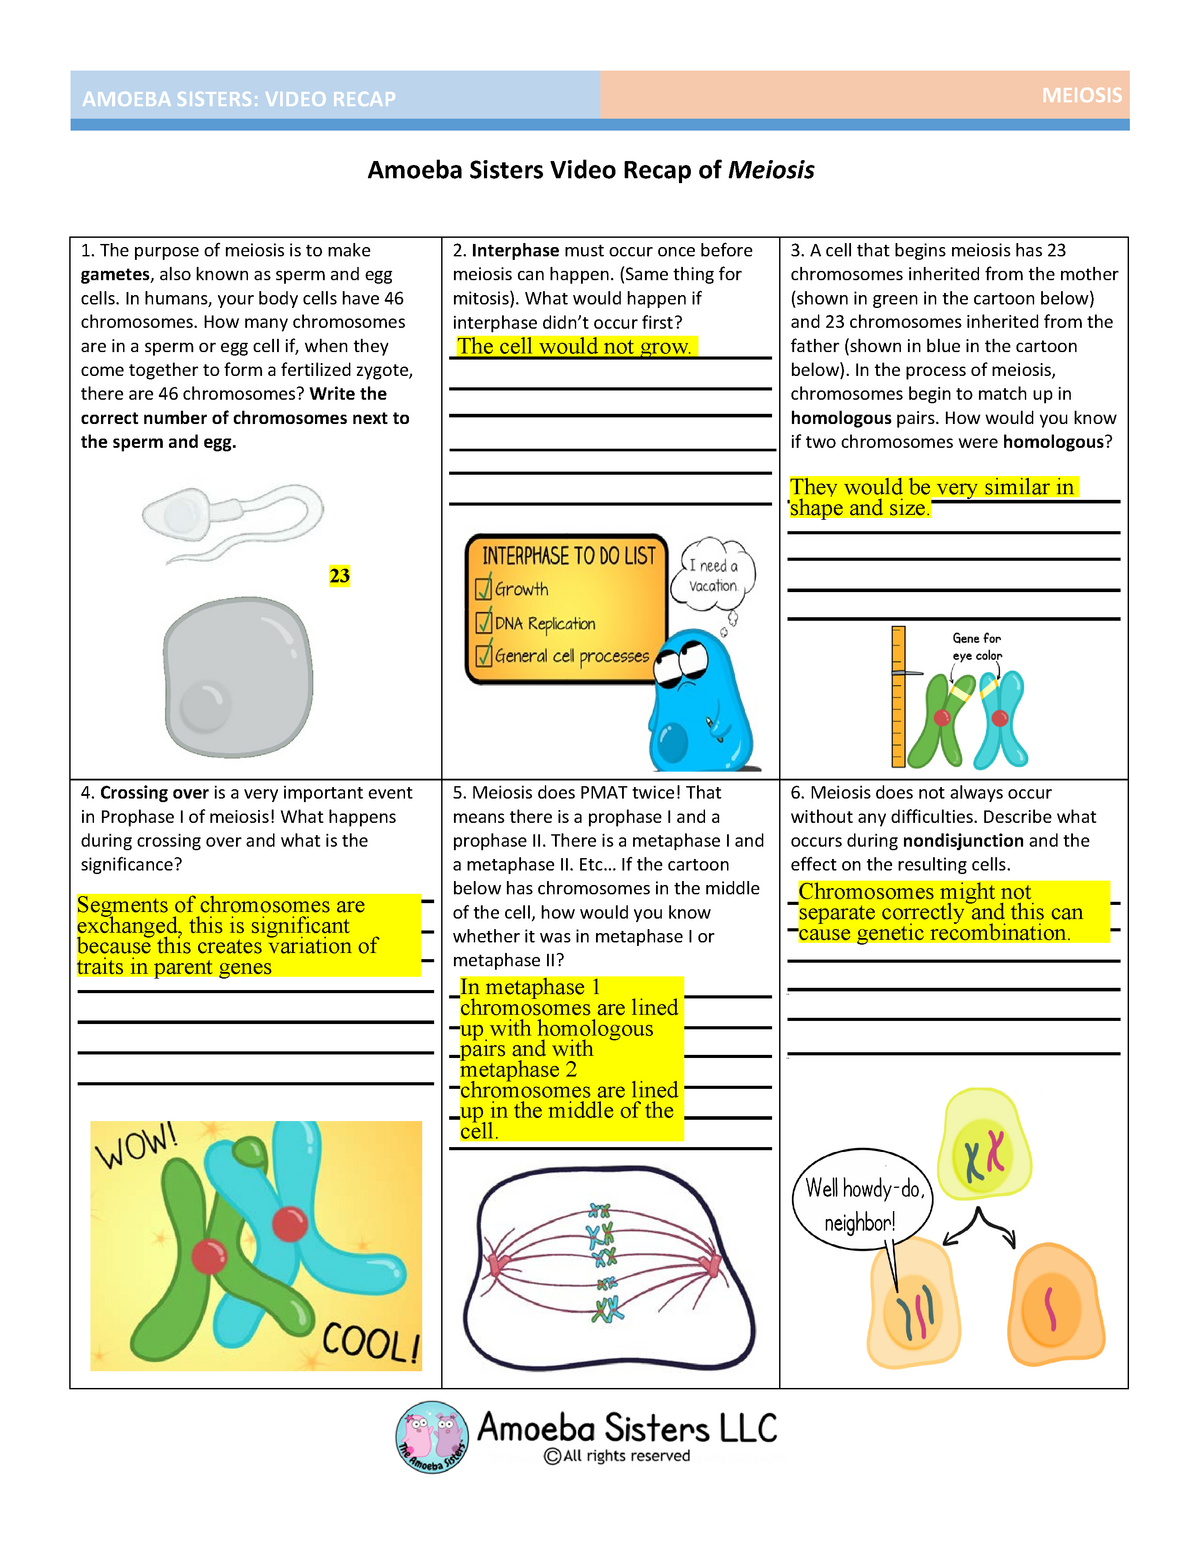 Pmat Meiosis : Mitosis Cell Cycle Storyboard By 8a406e66 Meiosis